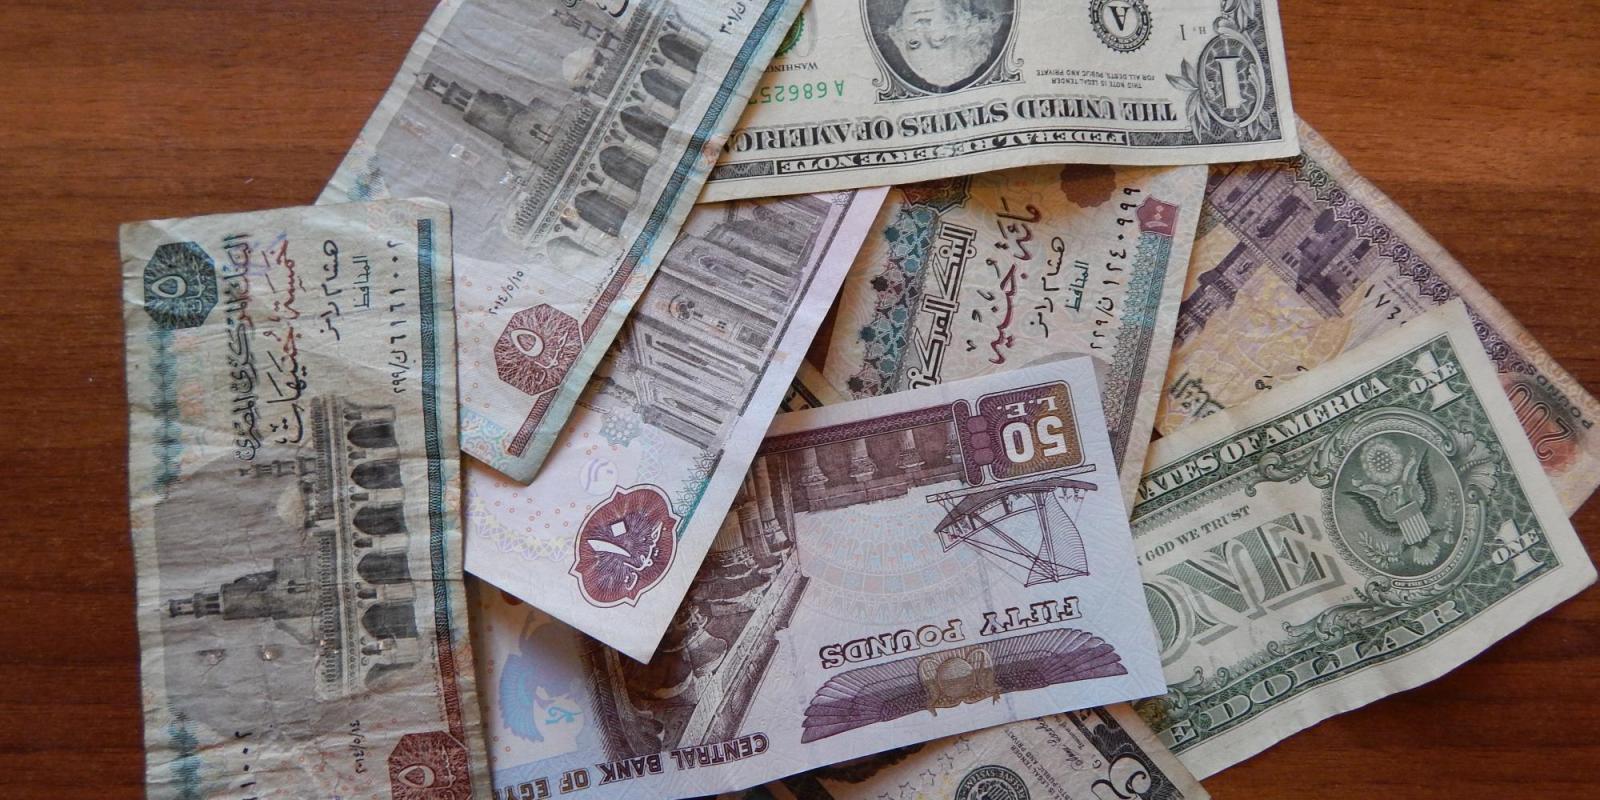 Finance Professor Aliaa Bassiouny offers insight into the fluctuations of the Egyptian pound against the U.S. dollar